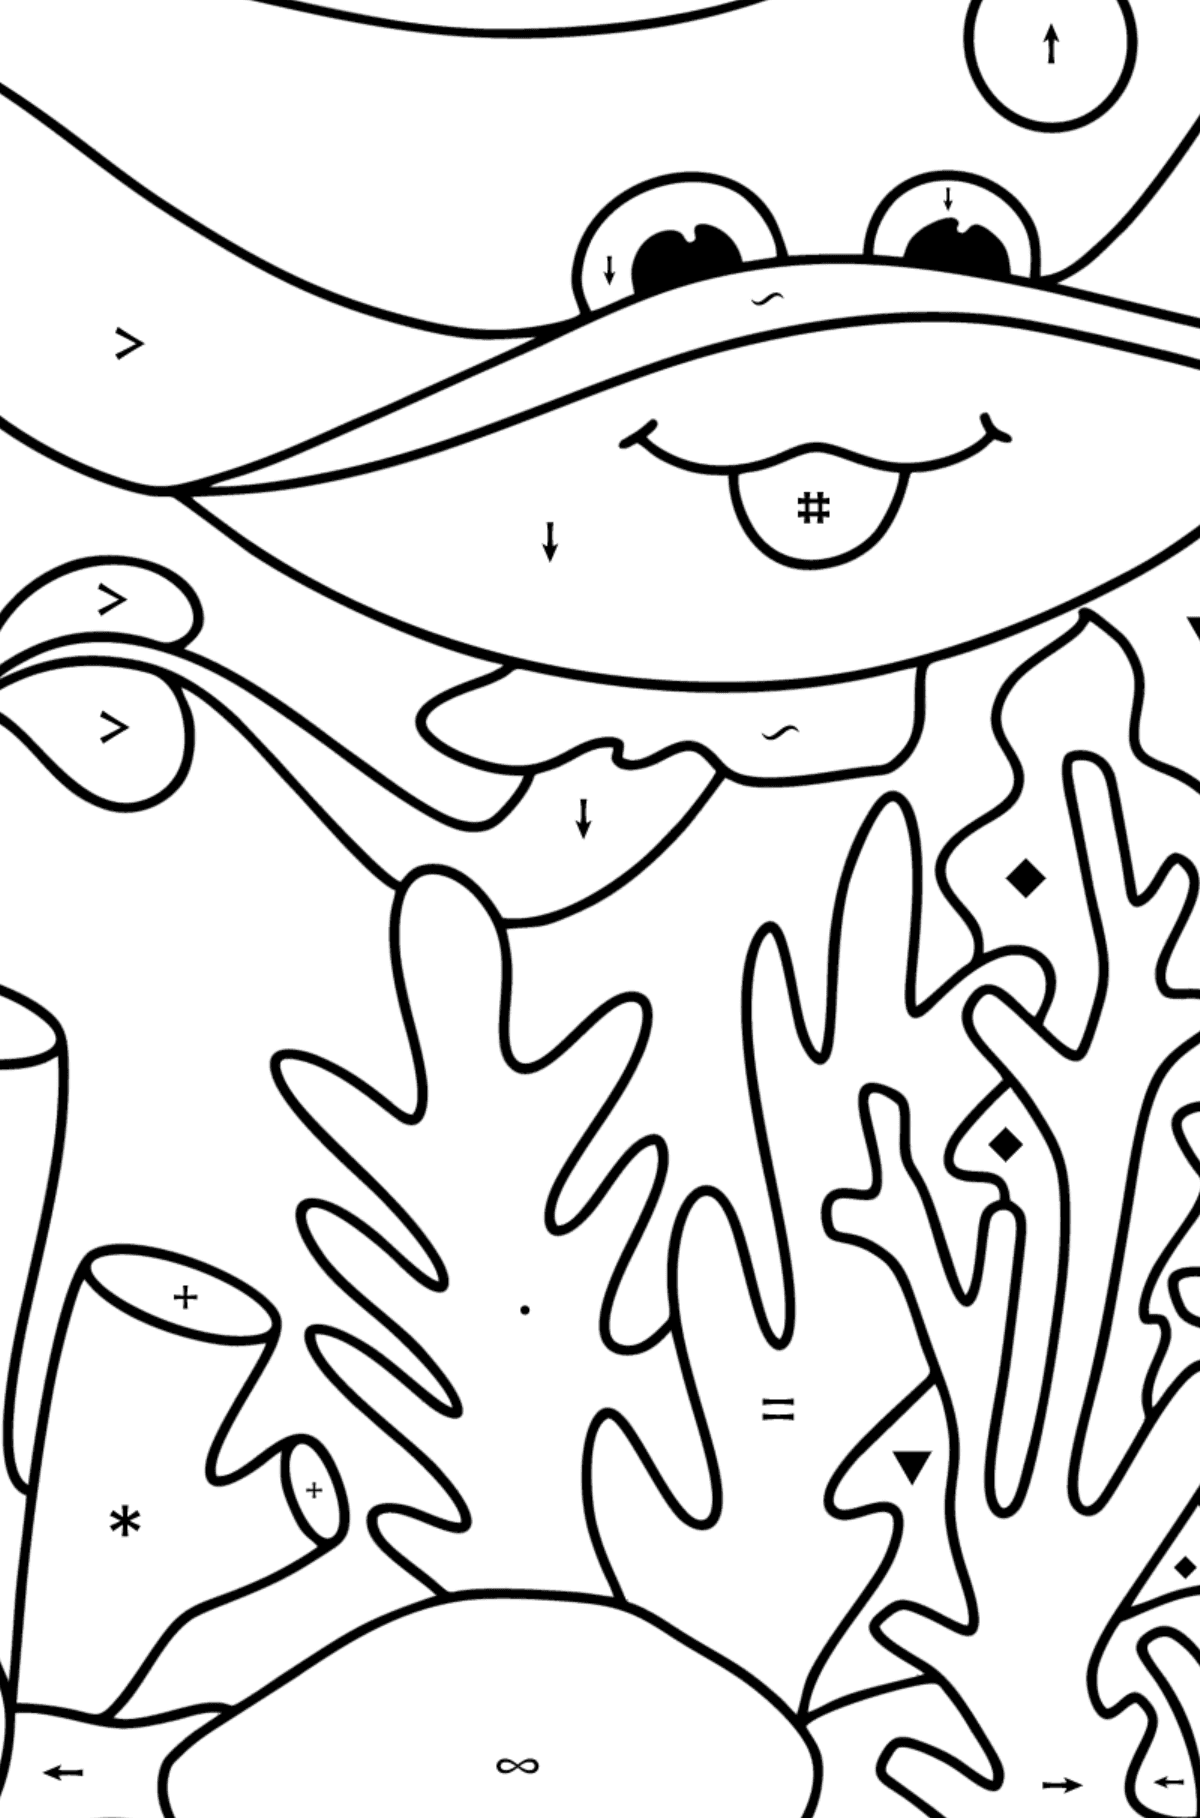 Stingray coloring page - Coloring by Symbols for Kids